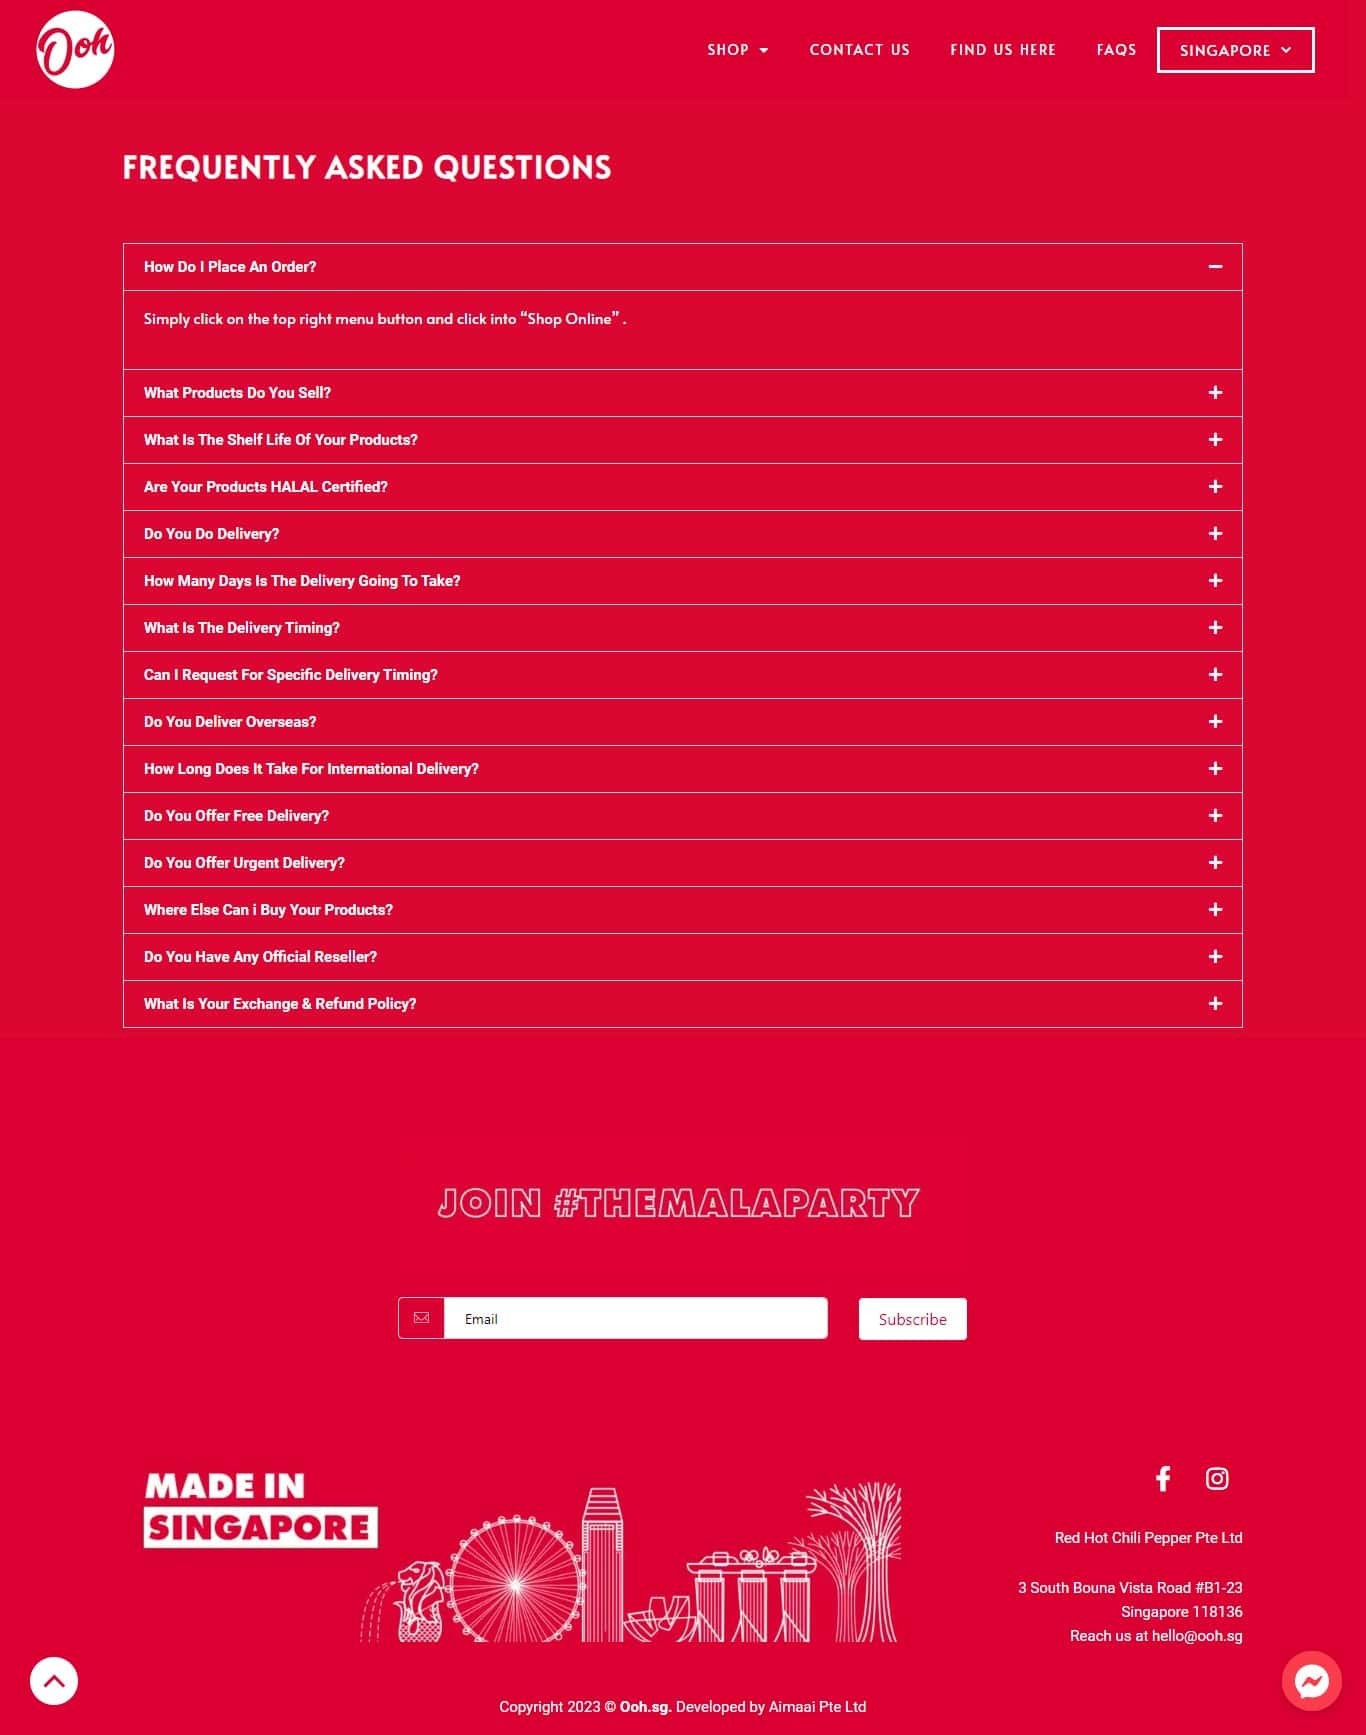 The WordPress homepage of a website with a red background.